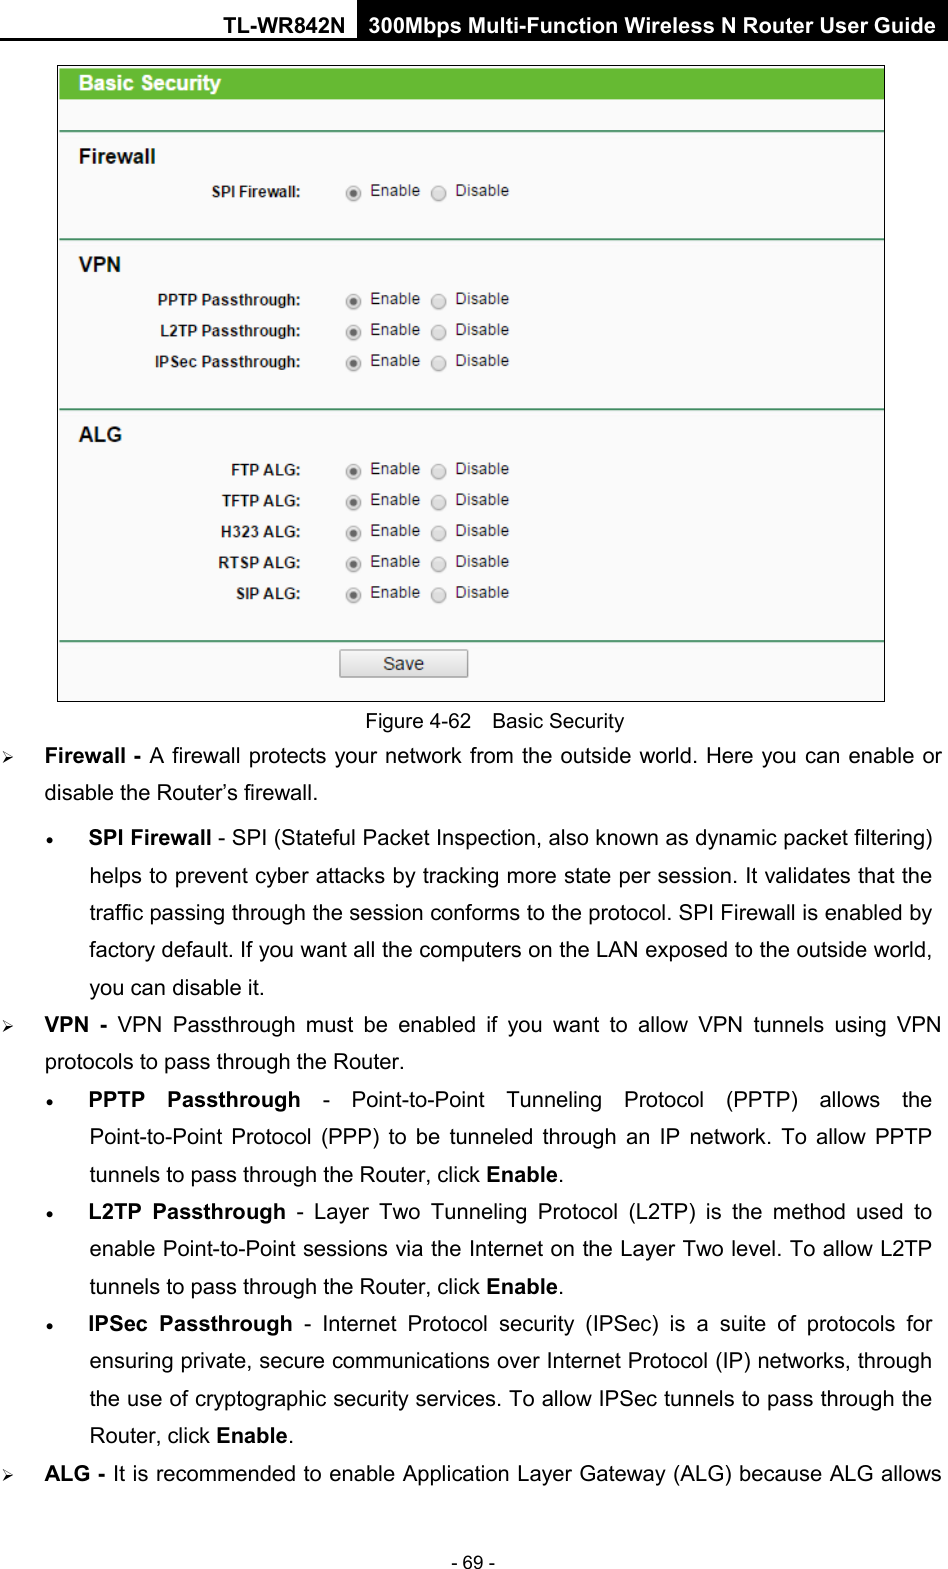 TL-WR842N 300Mbps Multi-Function Wireless N Router User Guide  - 69 -  Figure 4-62  Basic Security  Firewall - A firewall protects your network from the outside world. Here you can enable or disable the Router’s firewall. • SPI Firewall - SPI (Stateful Packet Inspection, also known as dynamic packet filtering) helps to prevent cyber attacks by tracking more state per session. It validates that the traffic passing through the session conforms to the protocol. SPI Firewall is enabled by factory default. If you want all the computers on the LAN exposed to the outside world, you can disable it.    VPN  -  VPN Passthrough must be enabled if you want to allow VPN tunnels using VPN protocols to pass through the Router. • PPTP Passthrough  -  Point-to-Point Tunneling Protocol (PPTP) allows the Point-to-Point Protocol (PPP) to be tunneled through an IP network. To allow PPTP tunnels to pass through the Router, click Enable. • L2TP Passthrough  -  Layer Two Tunneling Protocol (L2TP) is the method used to enable Point-to-Point sessions via the Internet on the Layer Two level. To allow L2TP tunnels to pass through the Router, click Enable. • IPSec Passthrough - Internet Protocol security (IPSec) is a suite of protocols for ensuring private, secure communications over Internet Protocol (IP) networks, through the use of cryptographic security services. To allow IPSec tunnels to pass through the Router, click Enable.  ALG - It is recommended to enable Application Layer Gateway (ALG) because ALG allows 